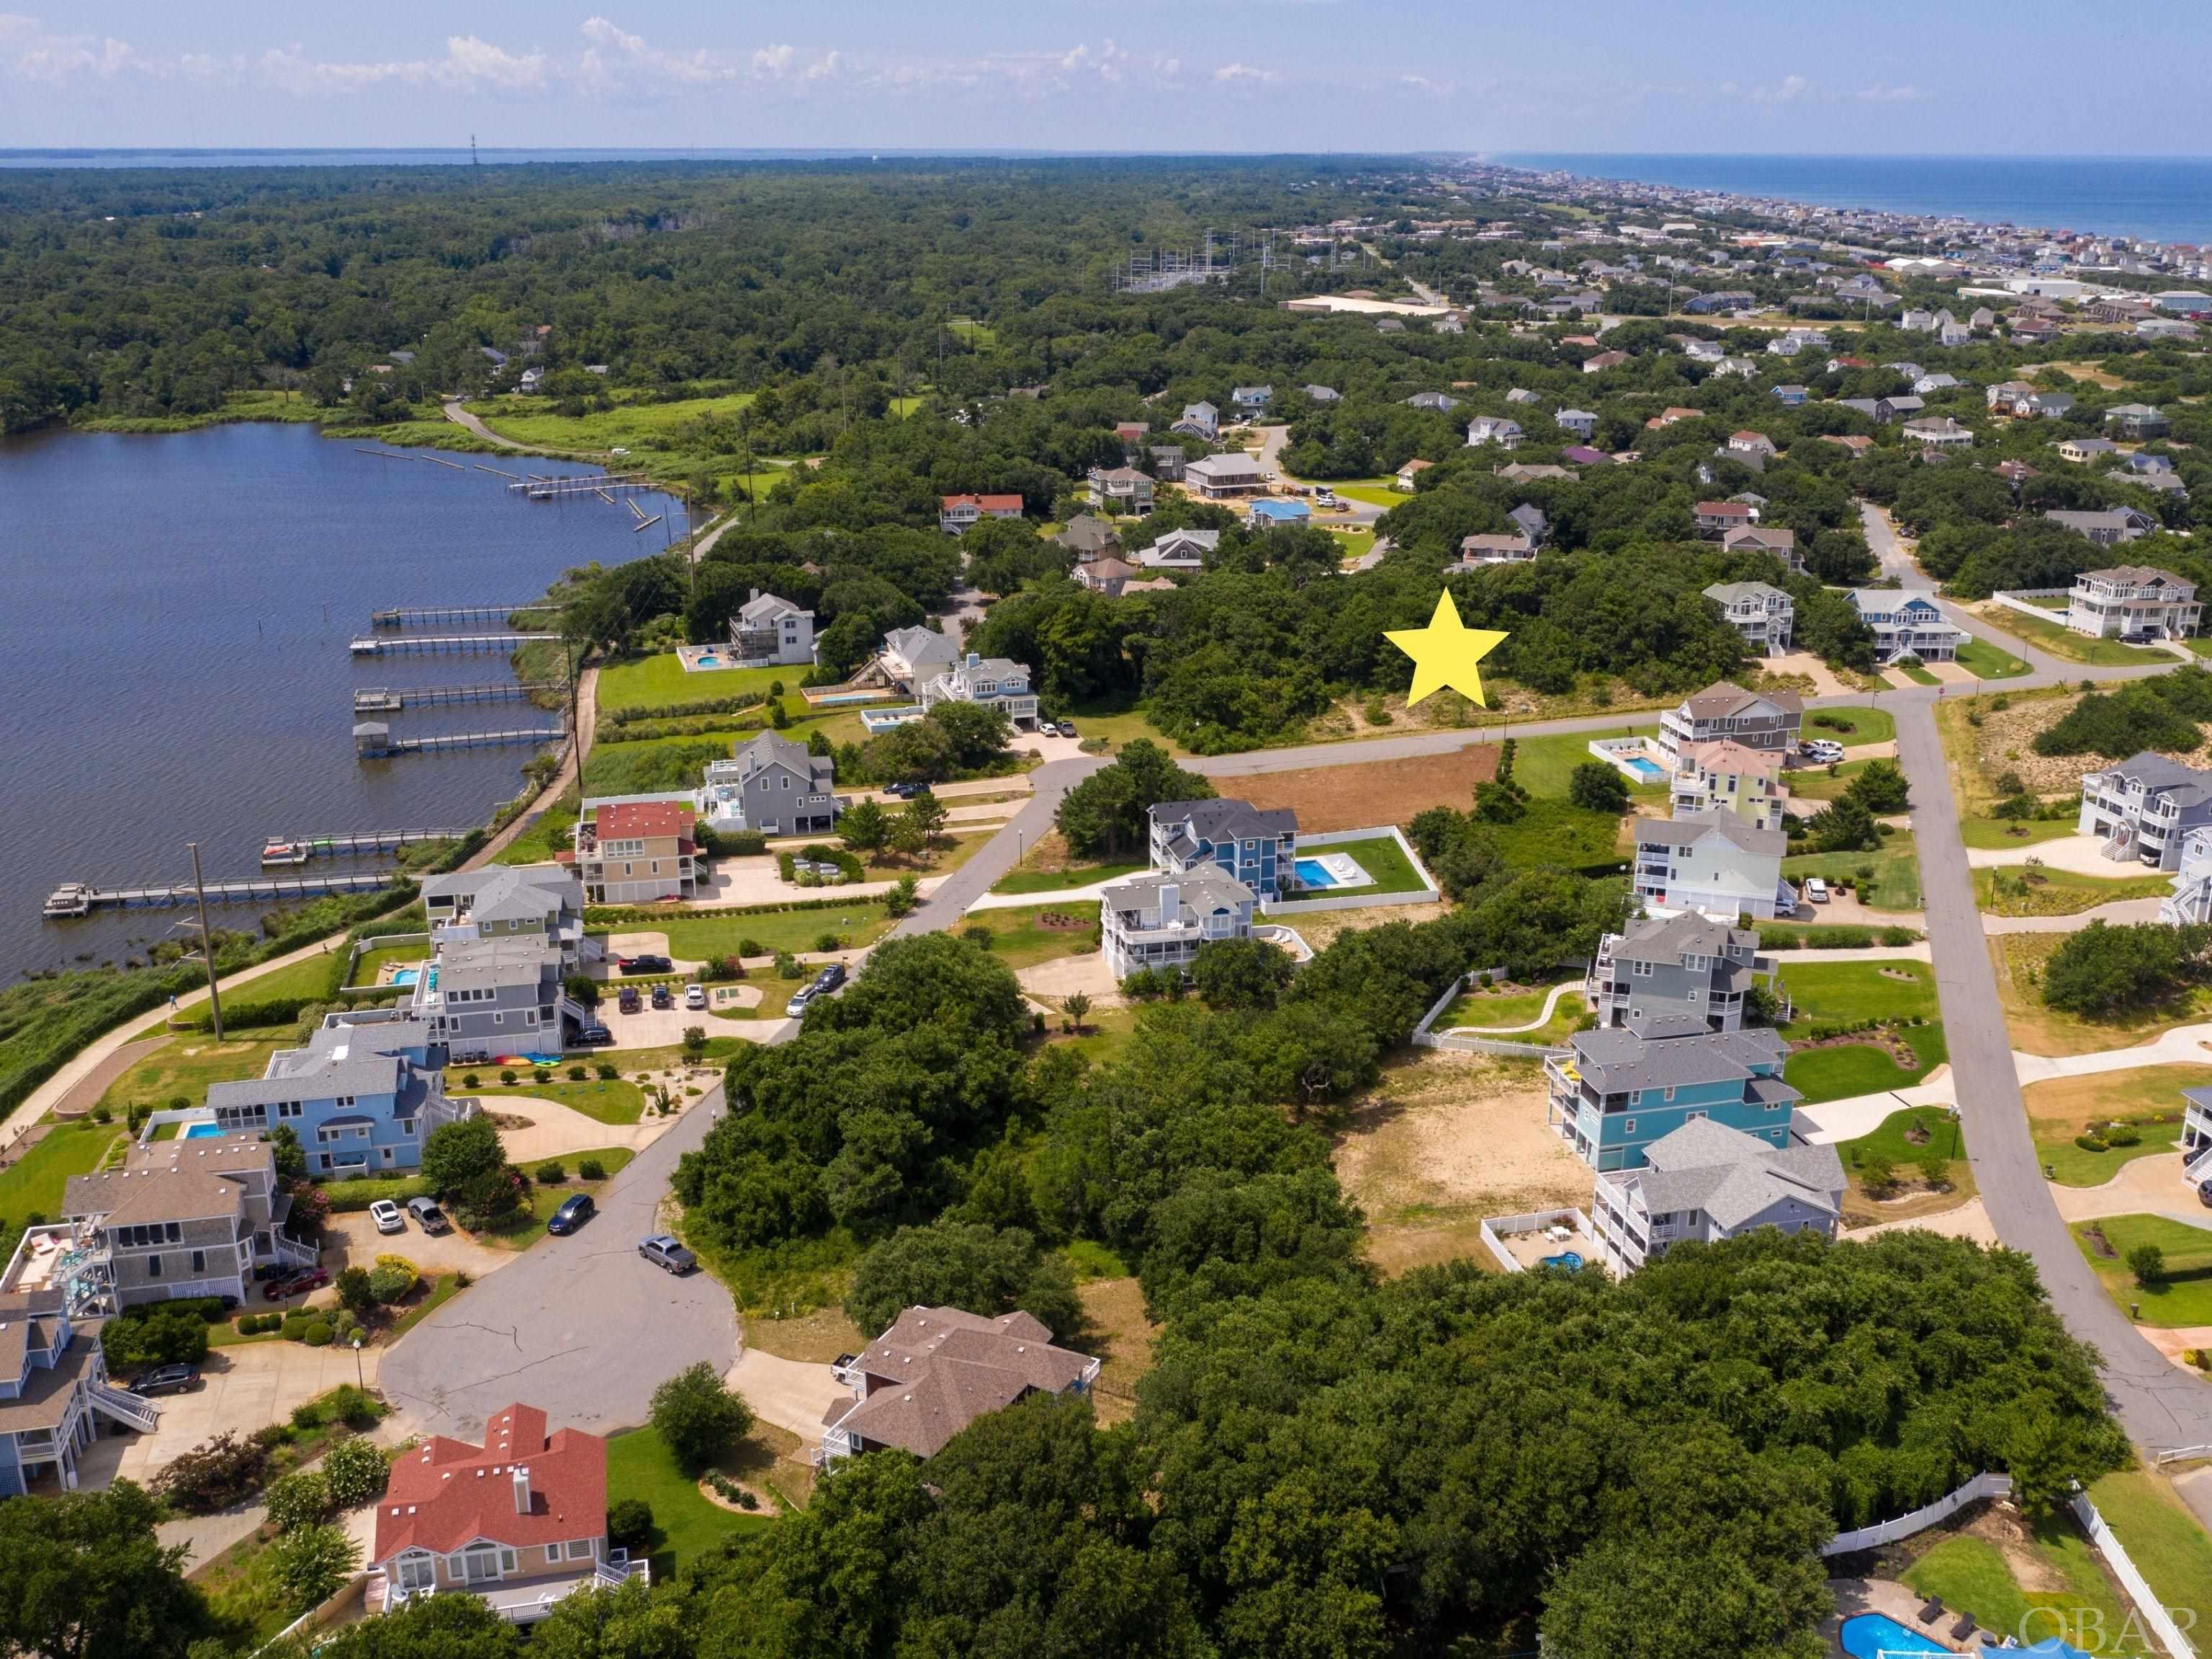 Ready to build your dream home in one of the most prestigious and sought after neighborhoods on the Outer Banks?  Look no further than this fantastic soundside homesite in First Flight Ridge!  Situated steps from the community pier, kayak launch, and multi-use path, this property offers all you need to get settled into the coastal lifestyle.  A reverse floorplan home should afford stunning sunset views over the sound.  First Flight Ridge is a private, gated community centrally located in the heart of Kitty Hawk within a quick walk or bike ride to numerous shops, restaurants and the beautiful Kitty Hawk beaches. The community backs to Kitty Hawk Bay and the Kitty Hawk multipurpose path perfect for walking, biking, running, you name it!  The soundside community pier is a perfect spot where you will often find neighbors gathering to watch the sunset. The pier also has a launch platform ideal for dropping in kayaks and paddle boards. This location is just waiting for your dream home!